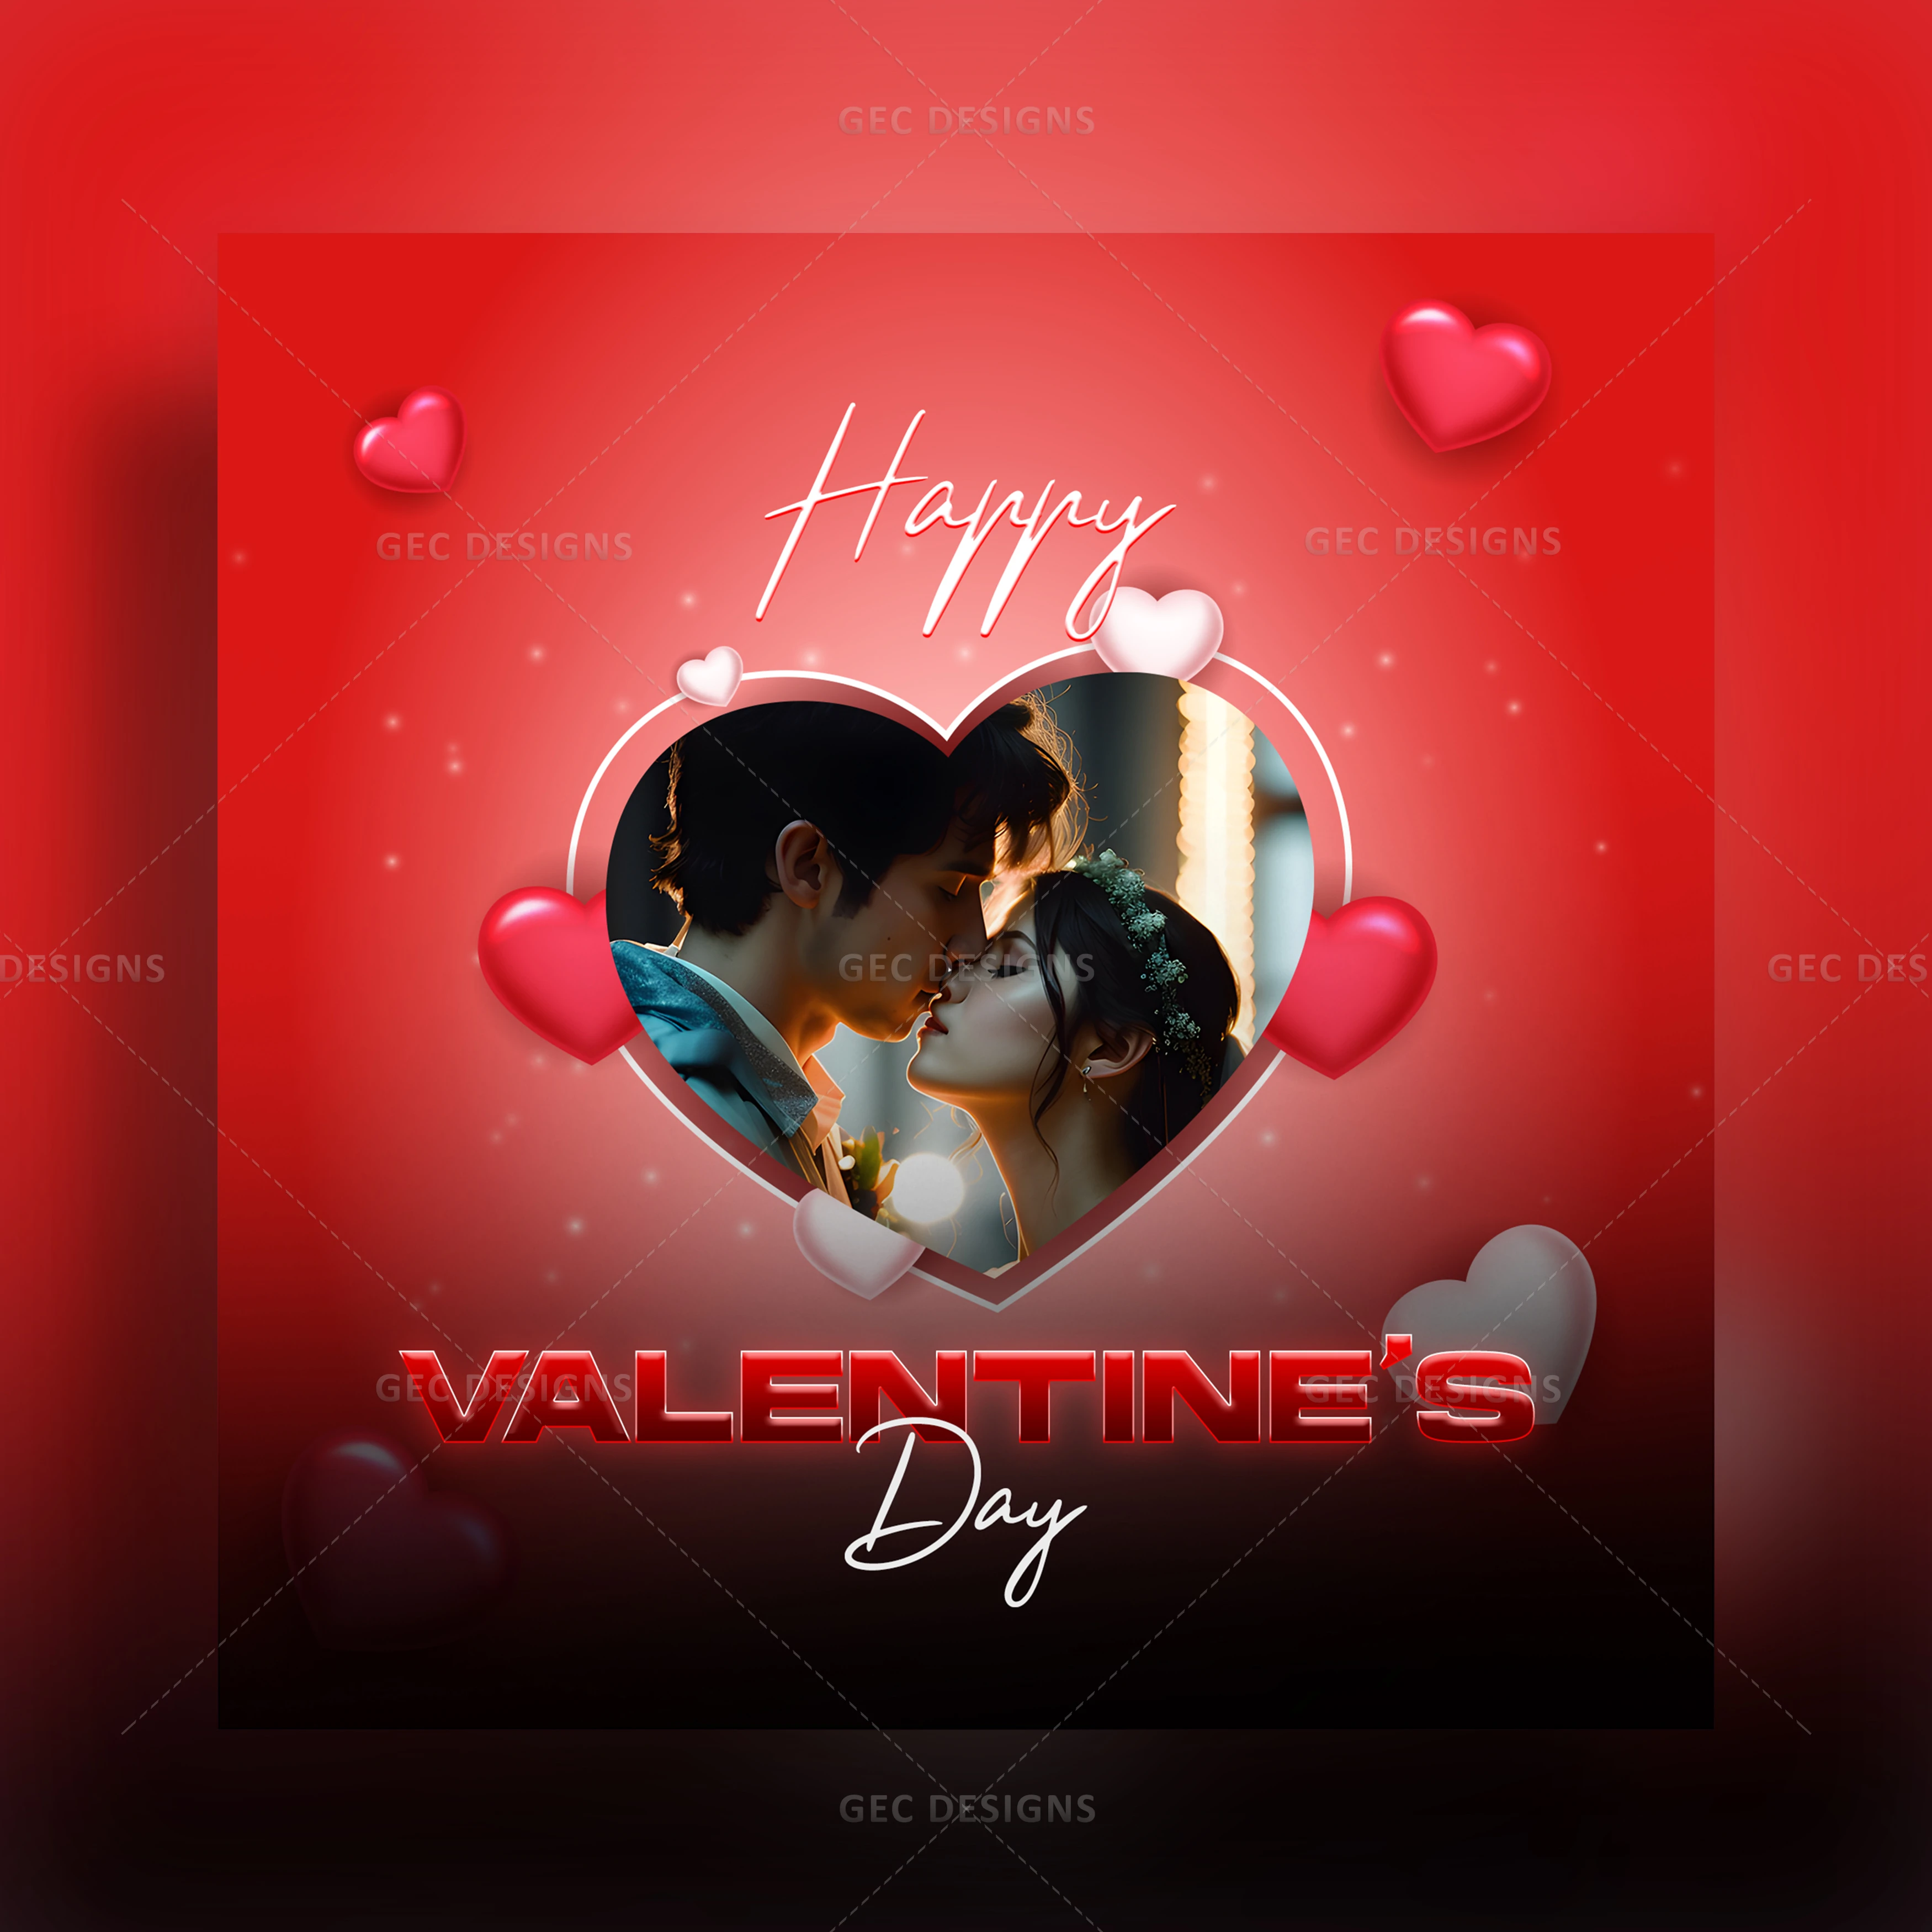 Couple, Love kiss, Couple kiss, Red heart background wallpaper image